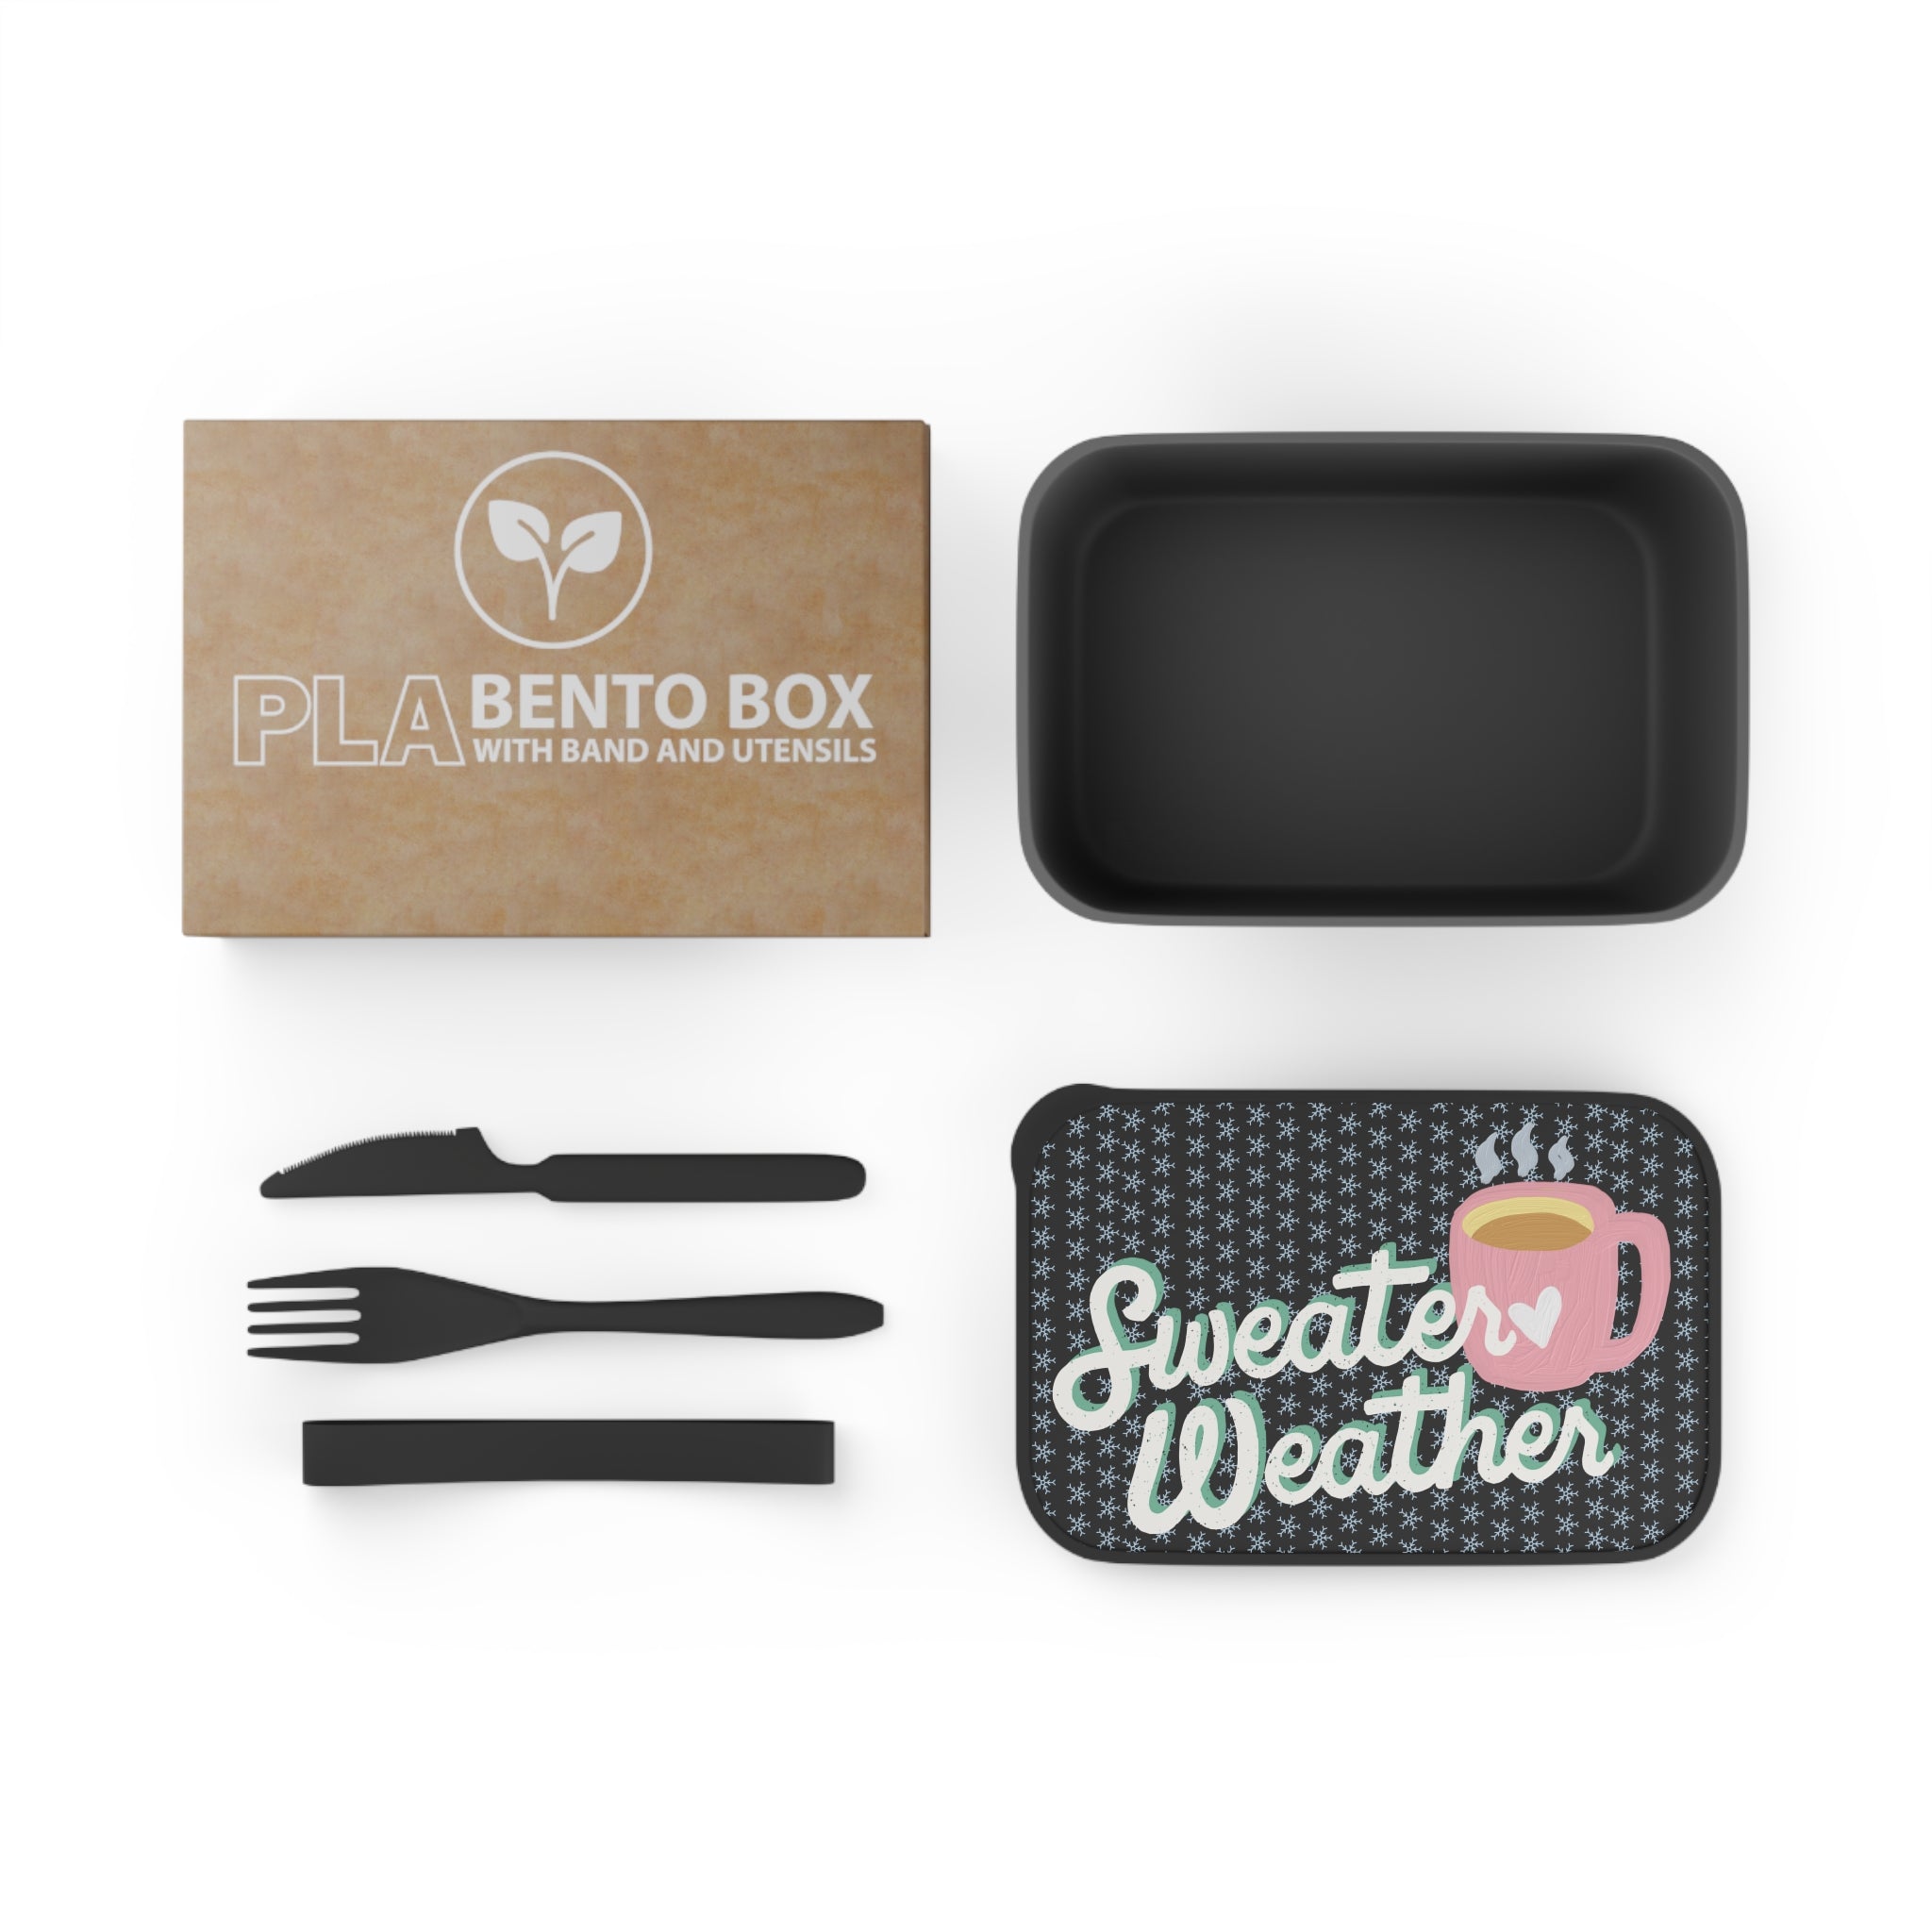 Sweater Weather - PLA Bento Box with Band and Utensils